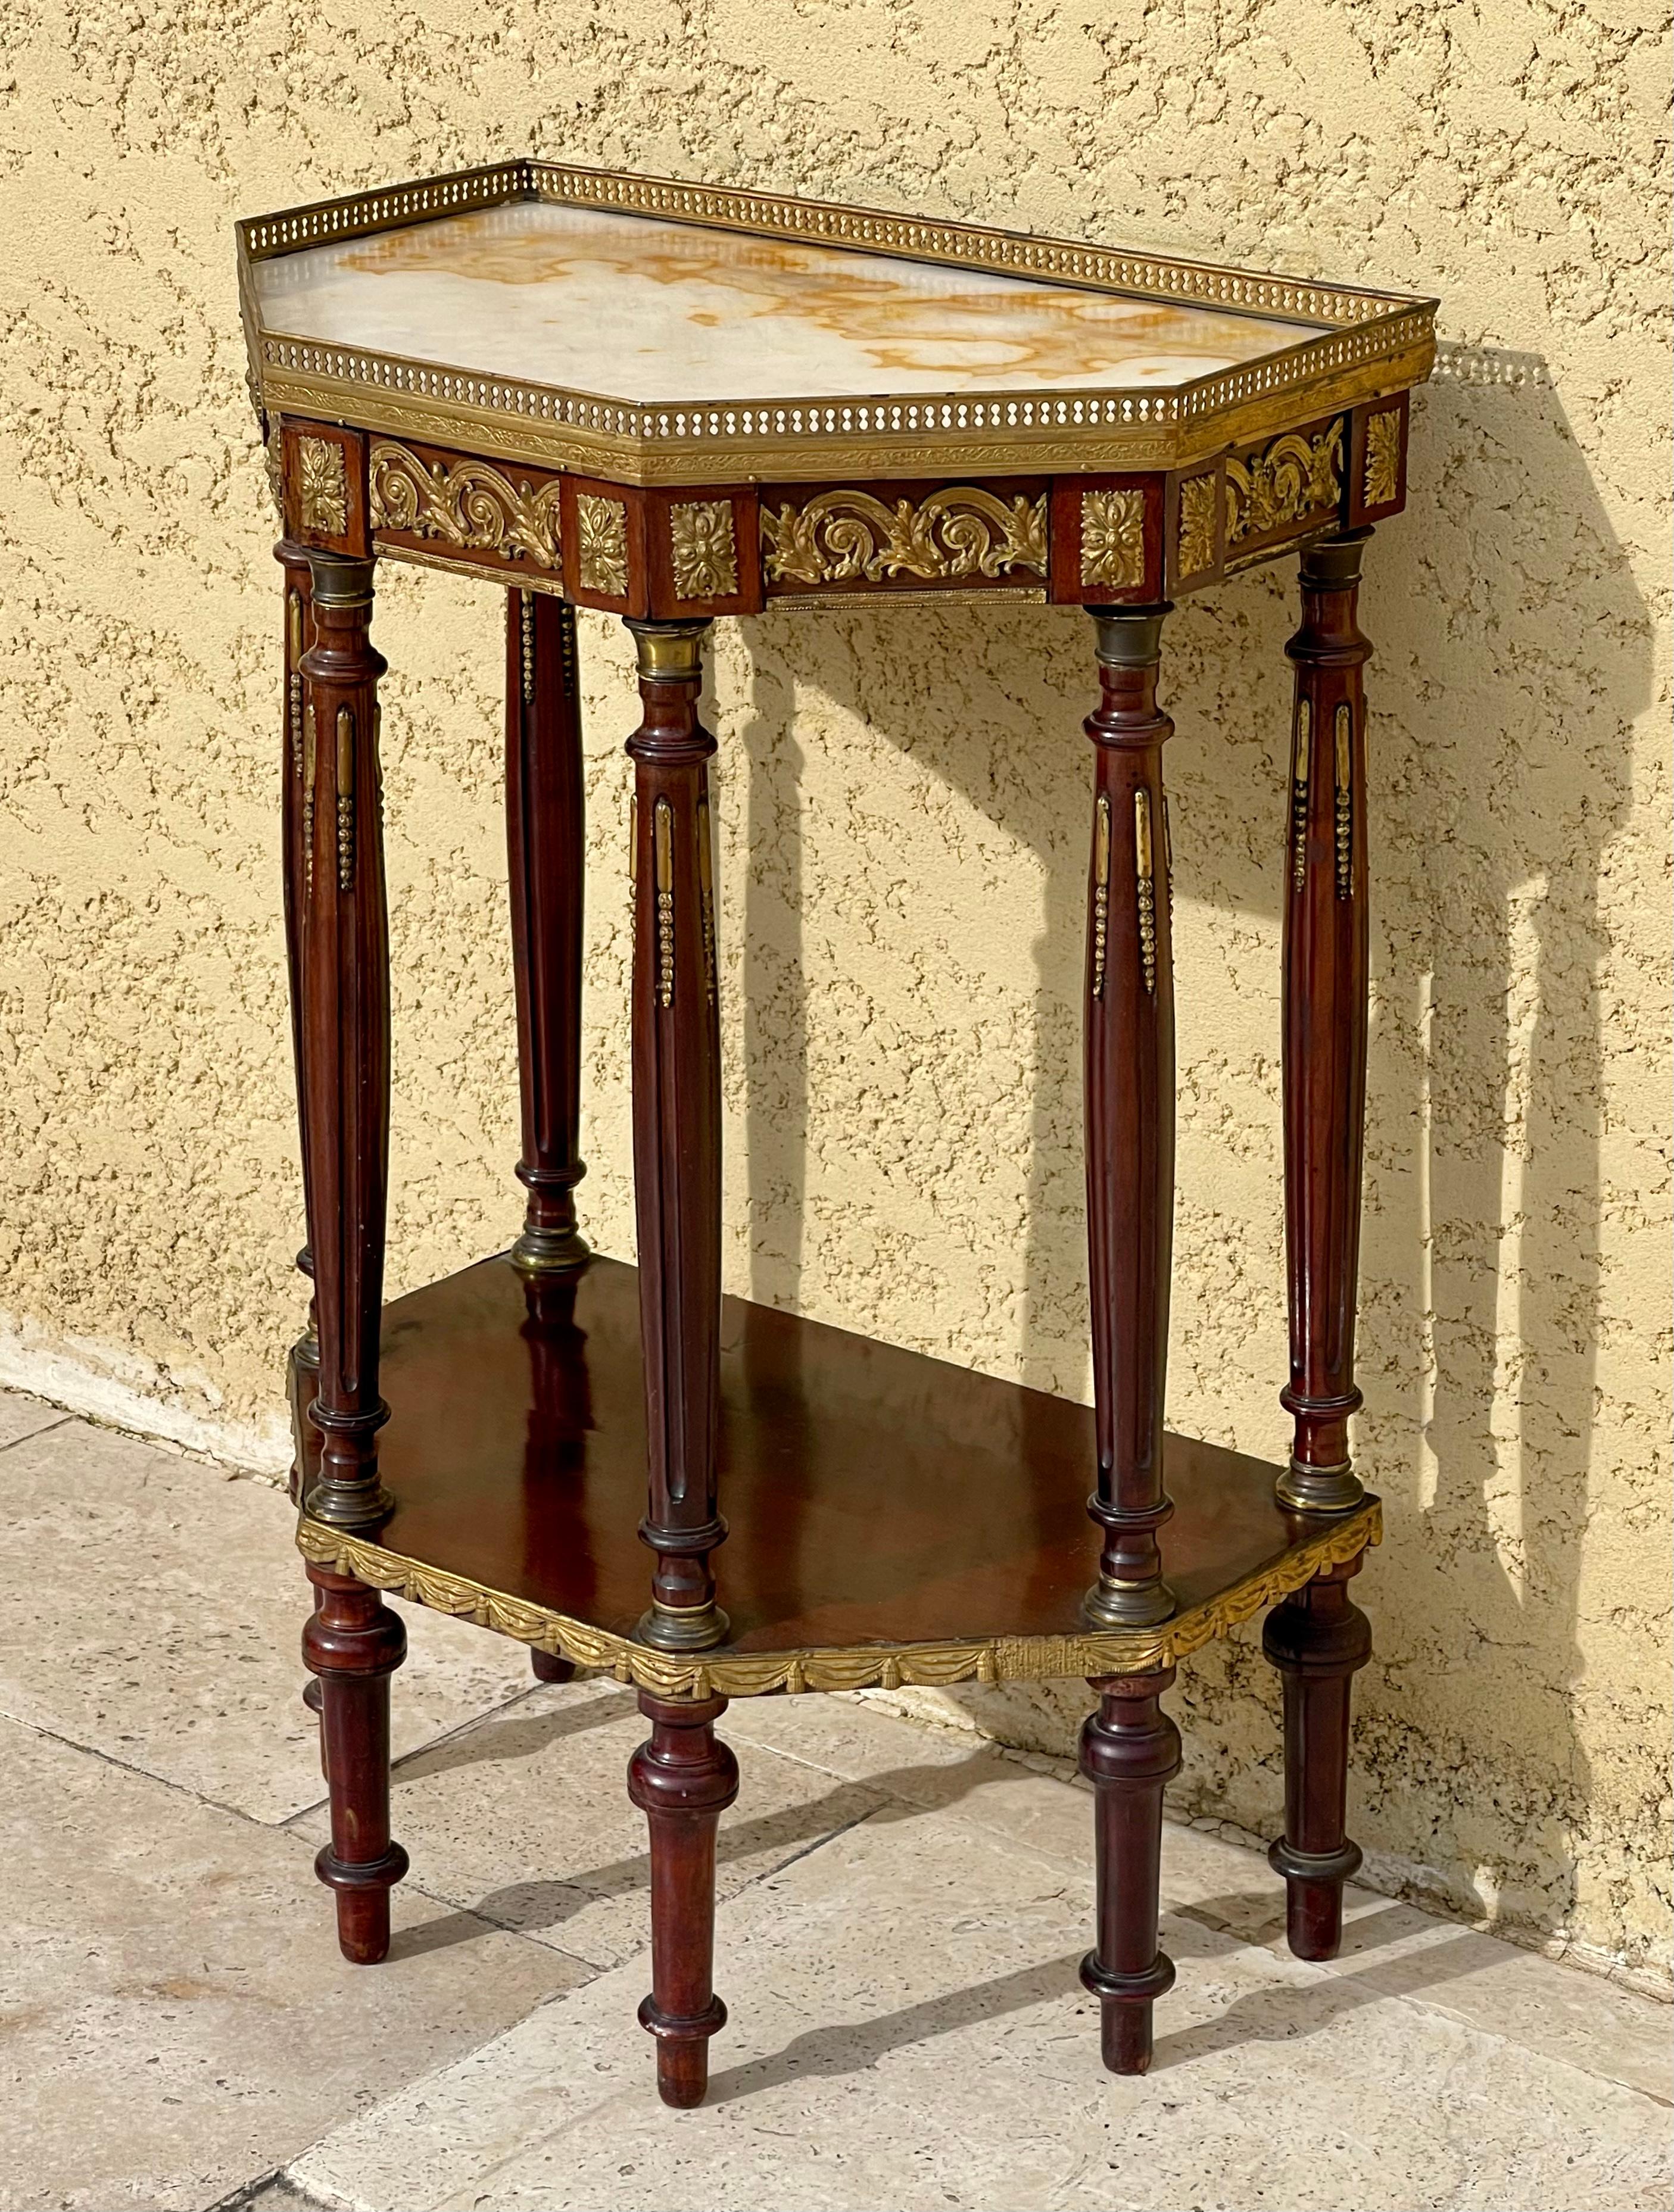 Louis XVI / Napoleon III style mahogany stand with 6 legs. White marble top with small bronze gallery. It is in good condition.

Dimensions
Width 48.5cm
Depth 32cm
Height 74.5cm